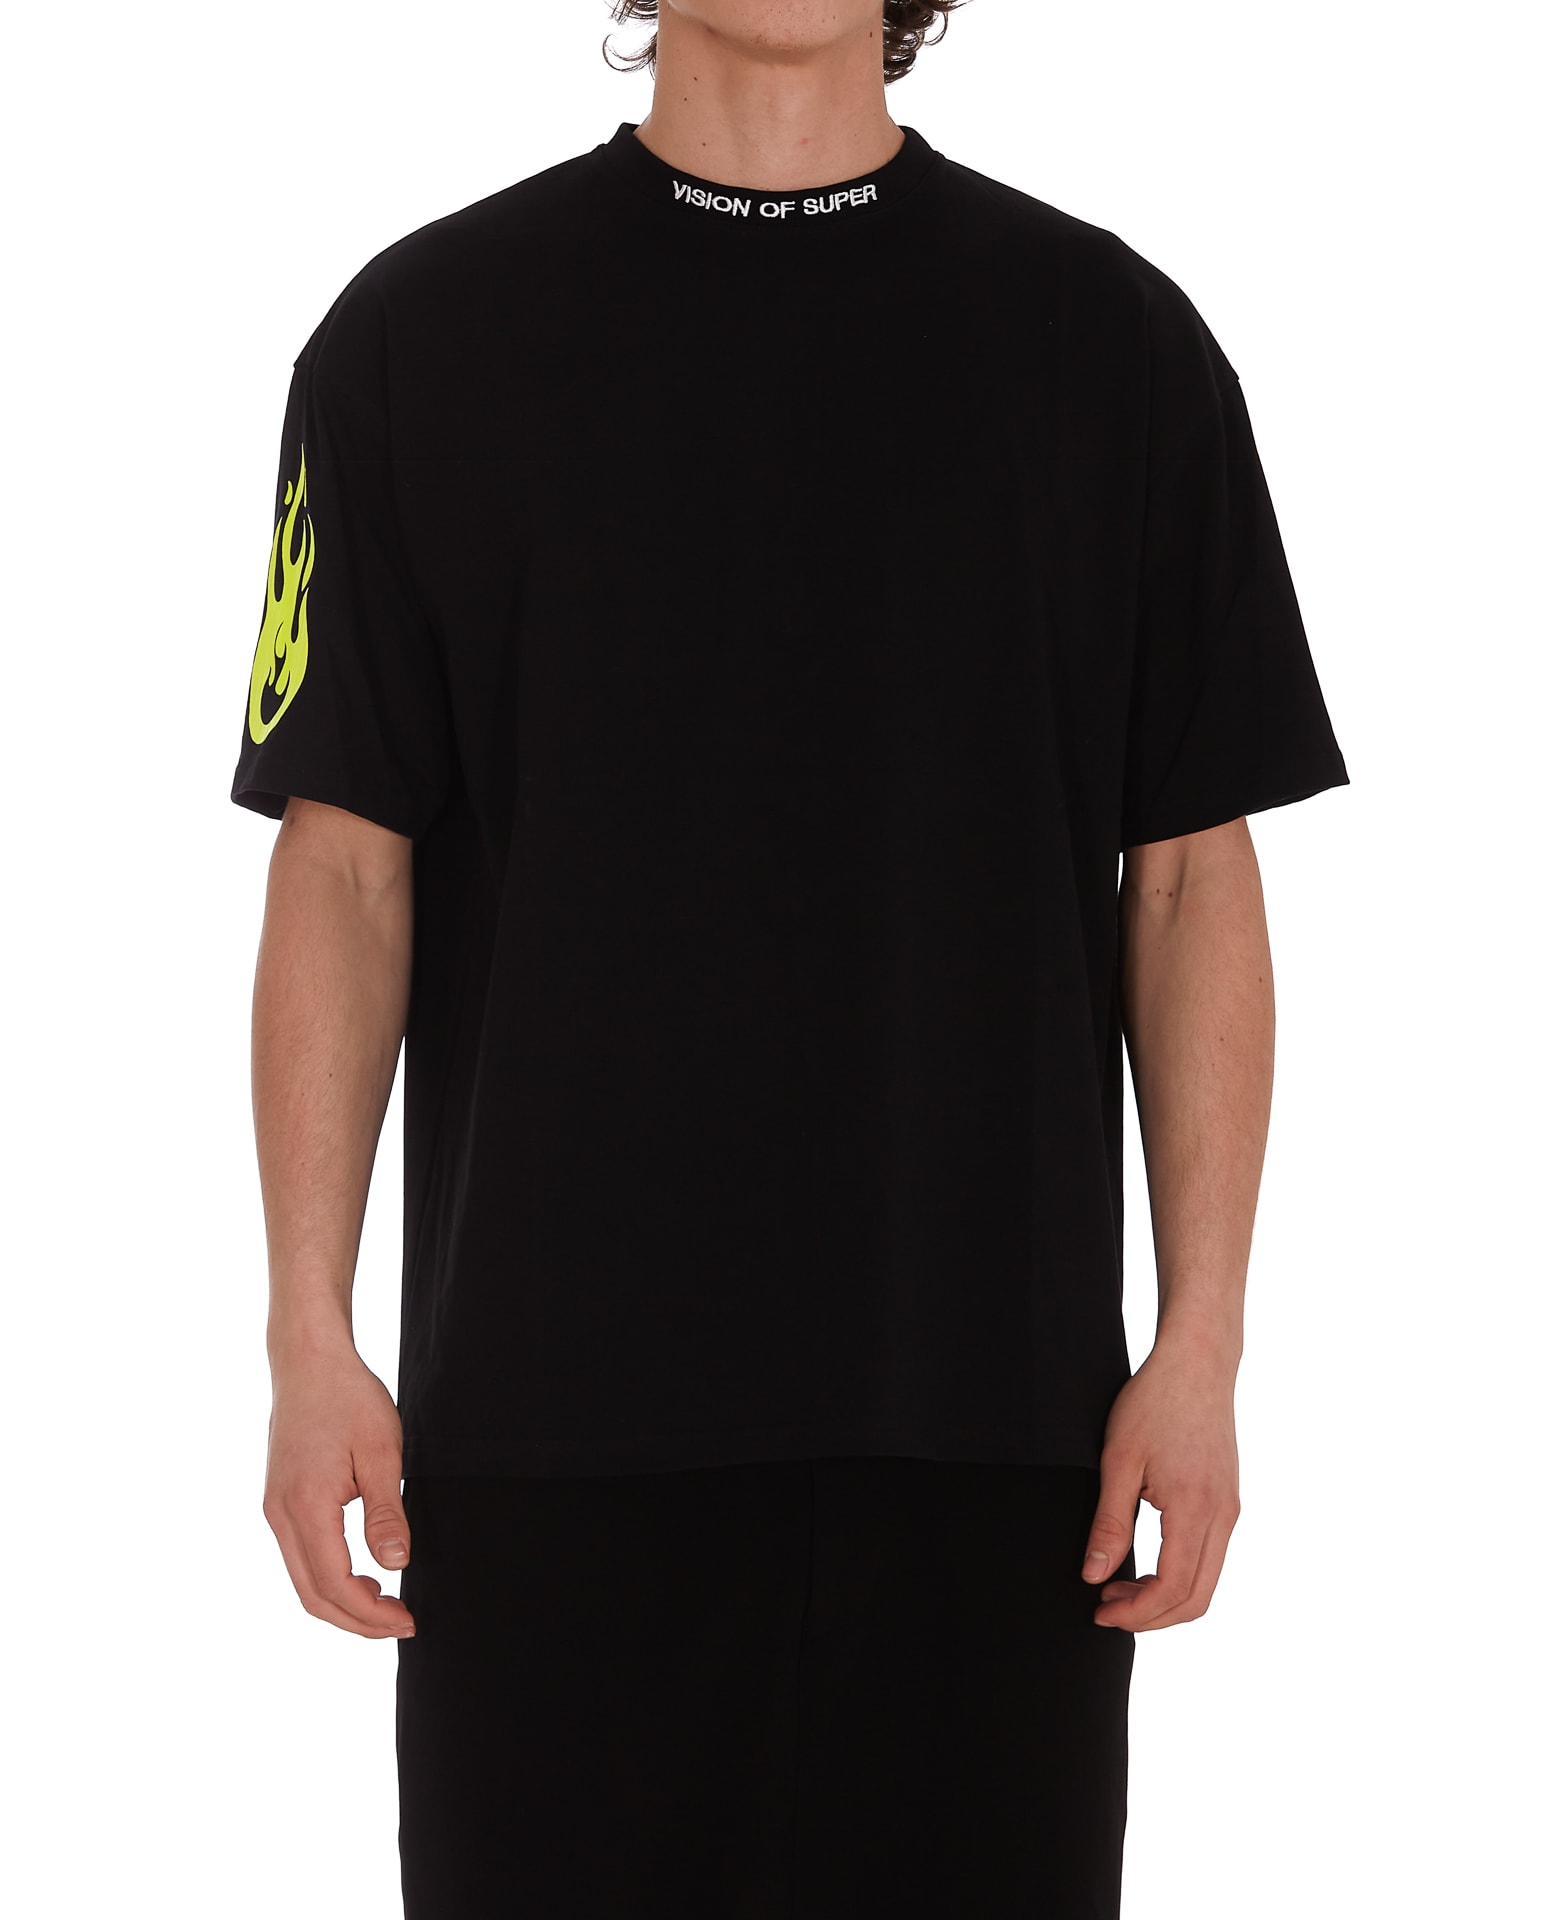 Vision Of Super Black Tshirt Fire Yellow Fluo